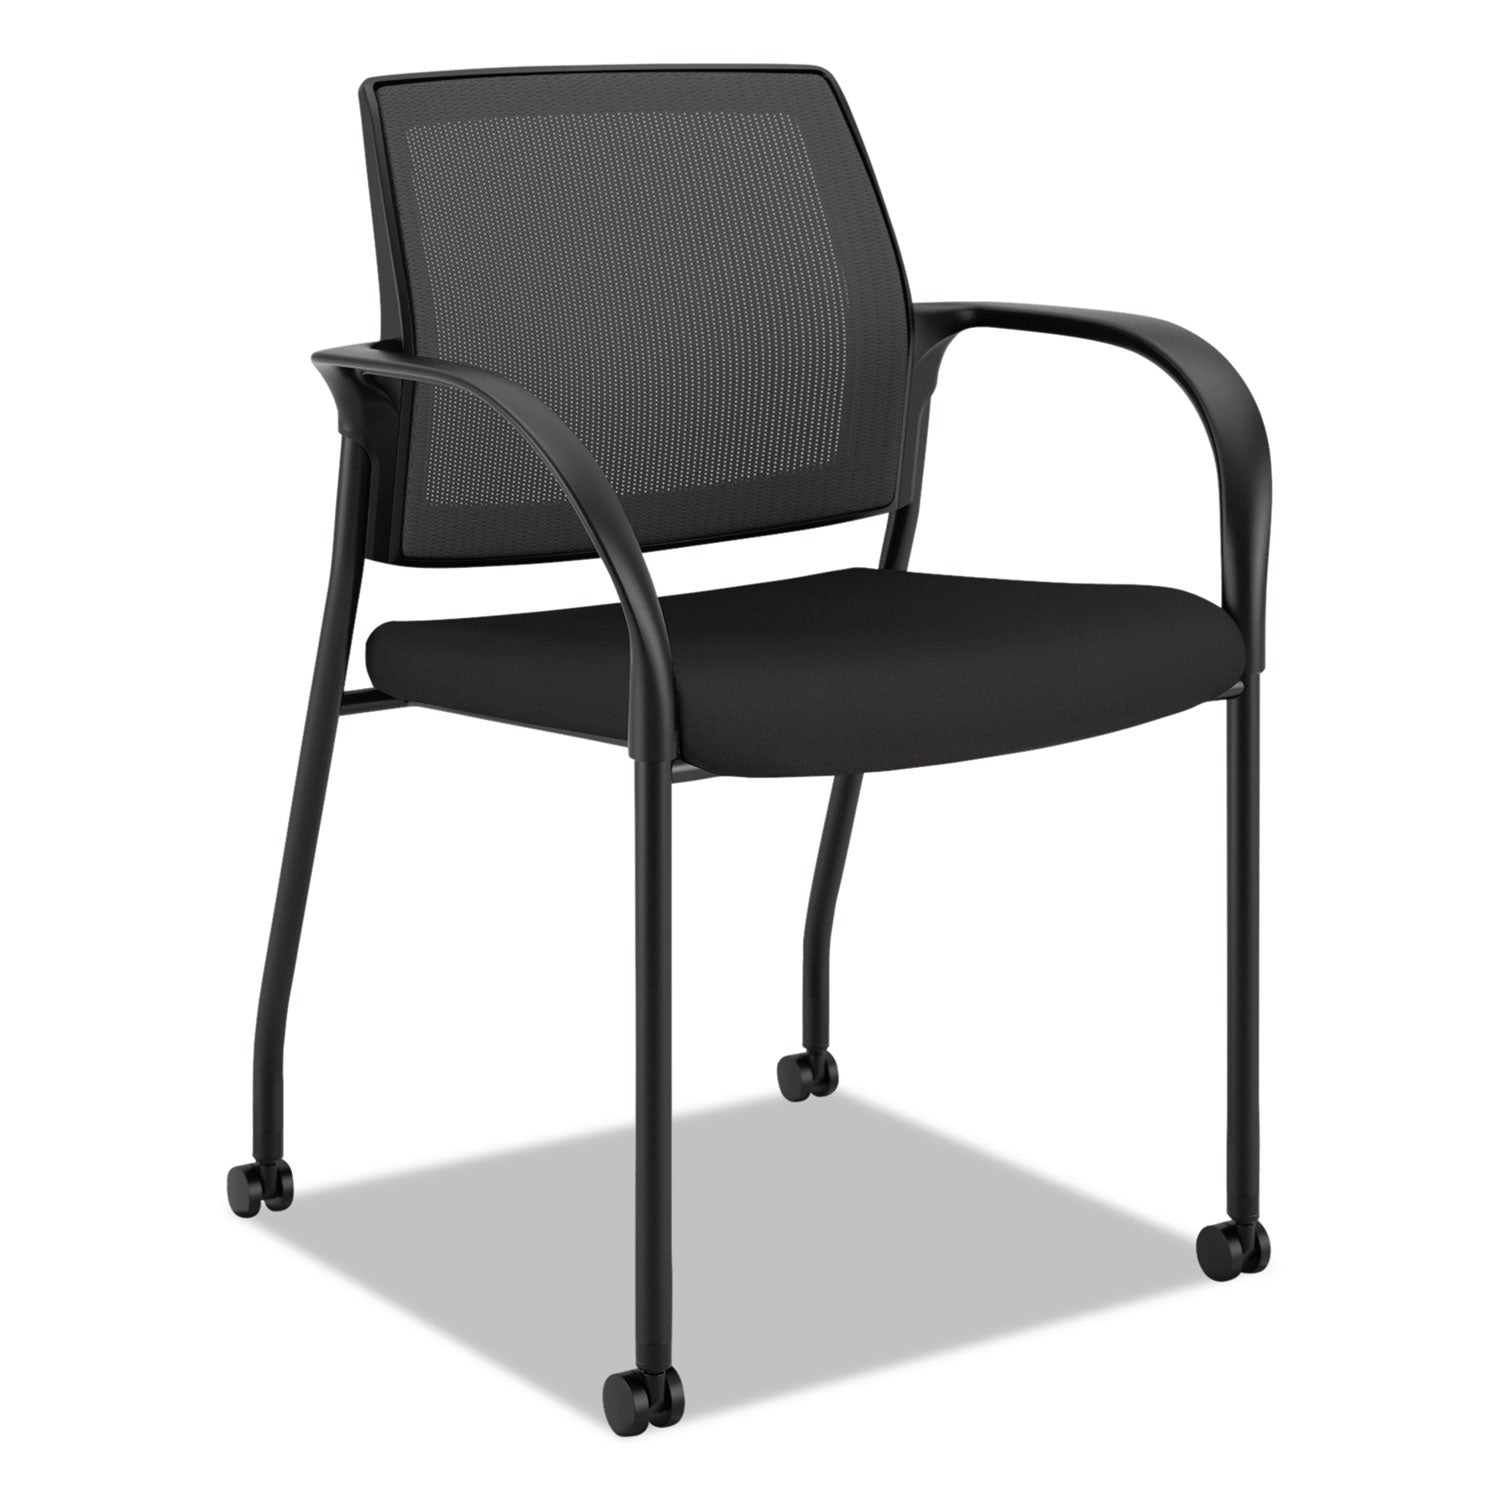 ignition-20-4-way-stretch-mesh-back-mobile-stacking-chair-supports-300-lb-18-seat-height-black-seat-back-black-base_honis107himcu10 - 1